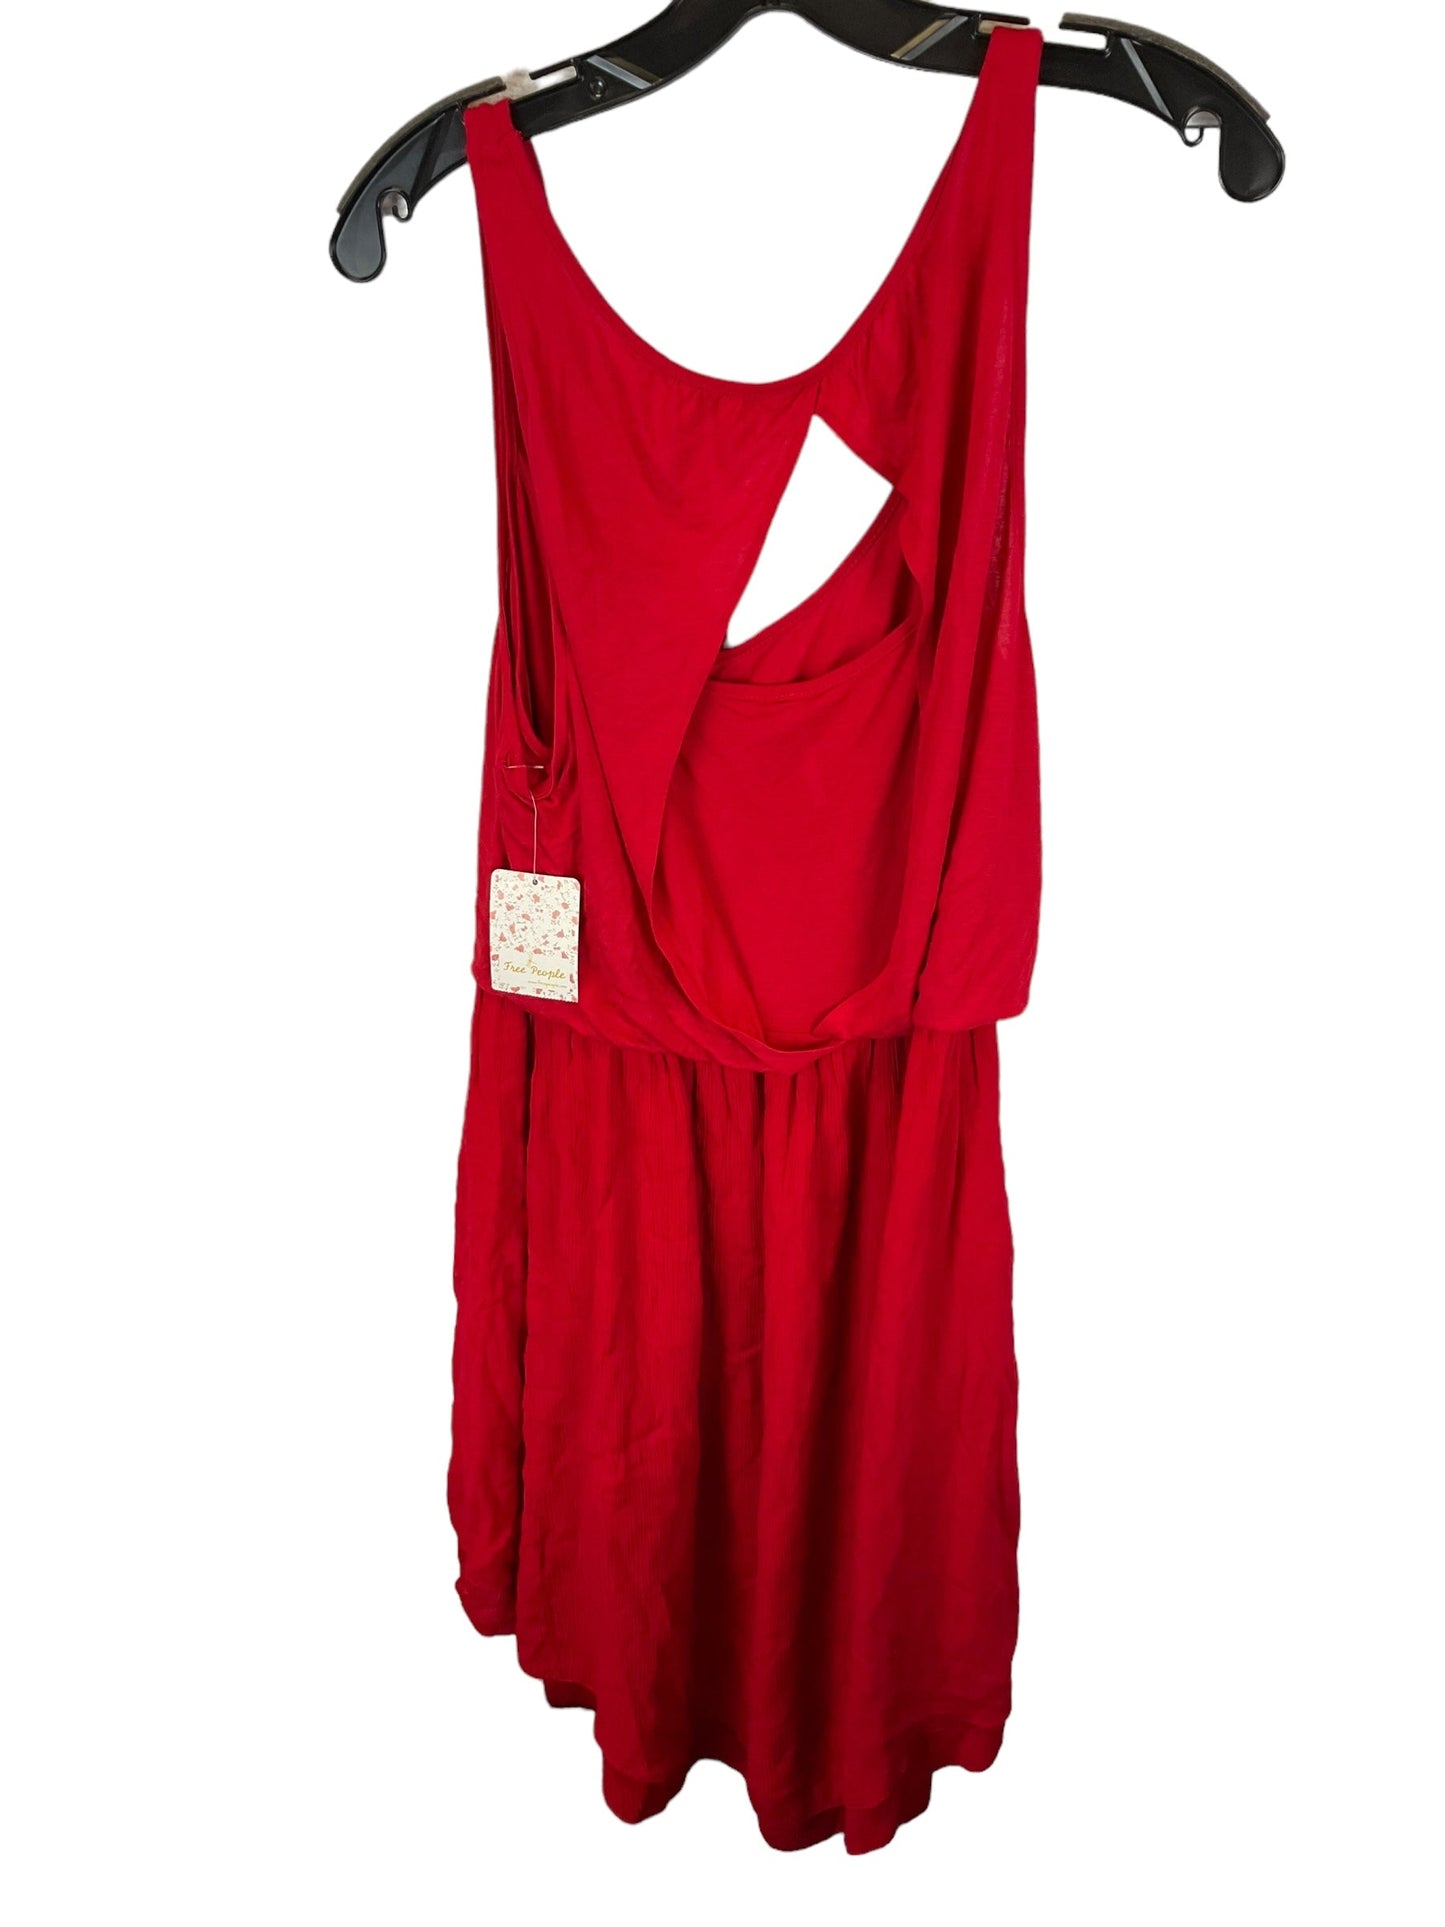 Red Dress Party Short Free People, Size L